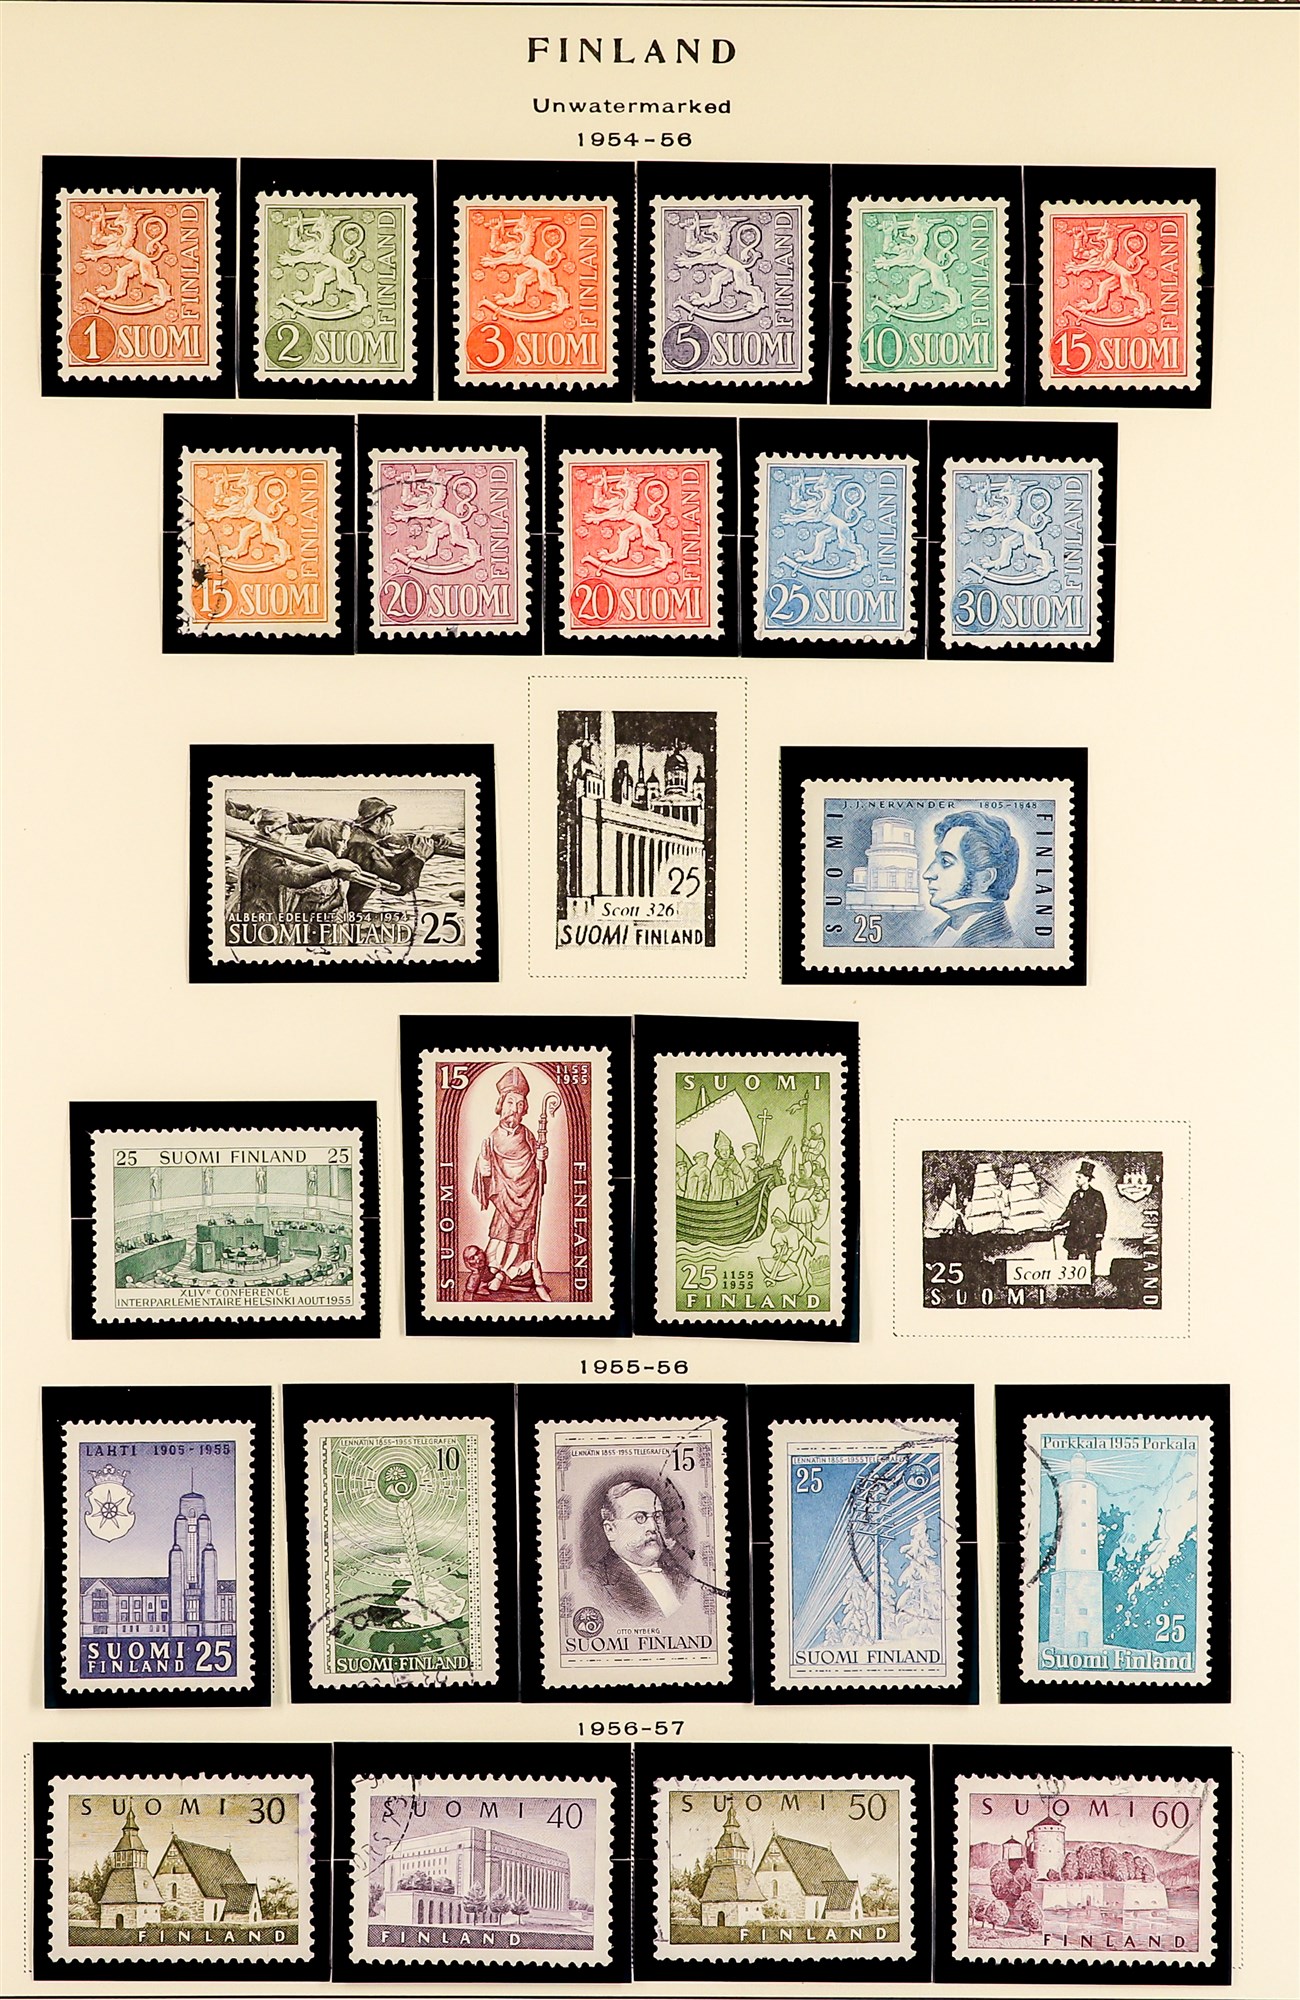 FINLAND 1860 - 1987 COLLECTION of over 900 mint & used stamps and miniature sheets on album pages, - Image 13 of 18